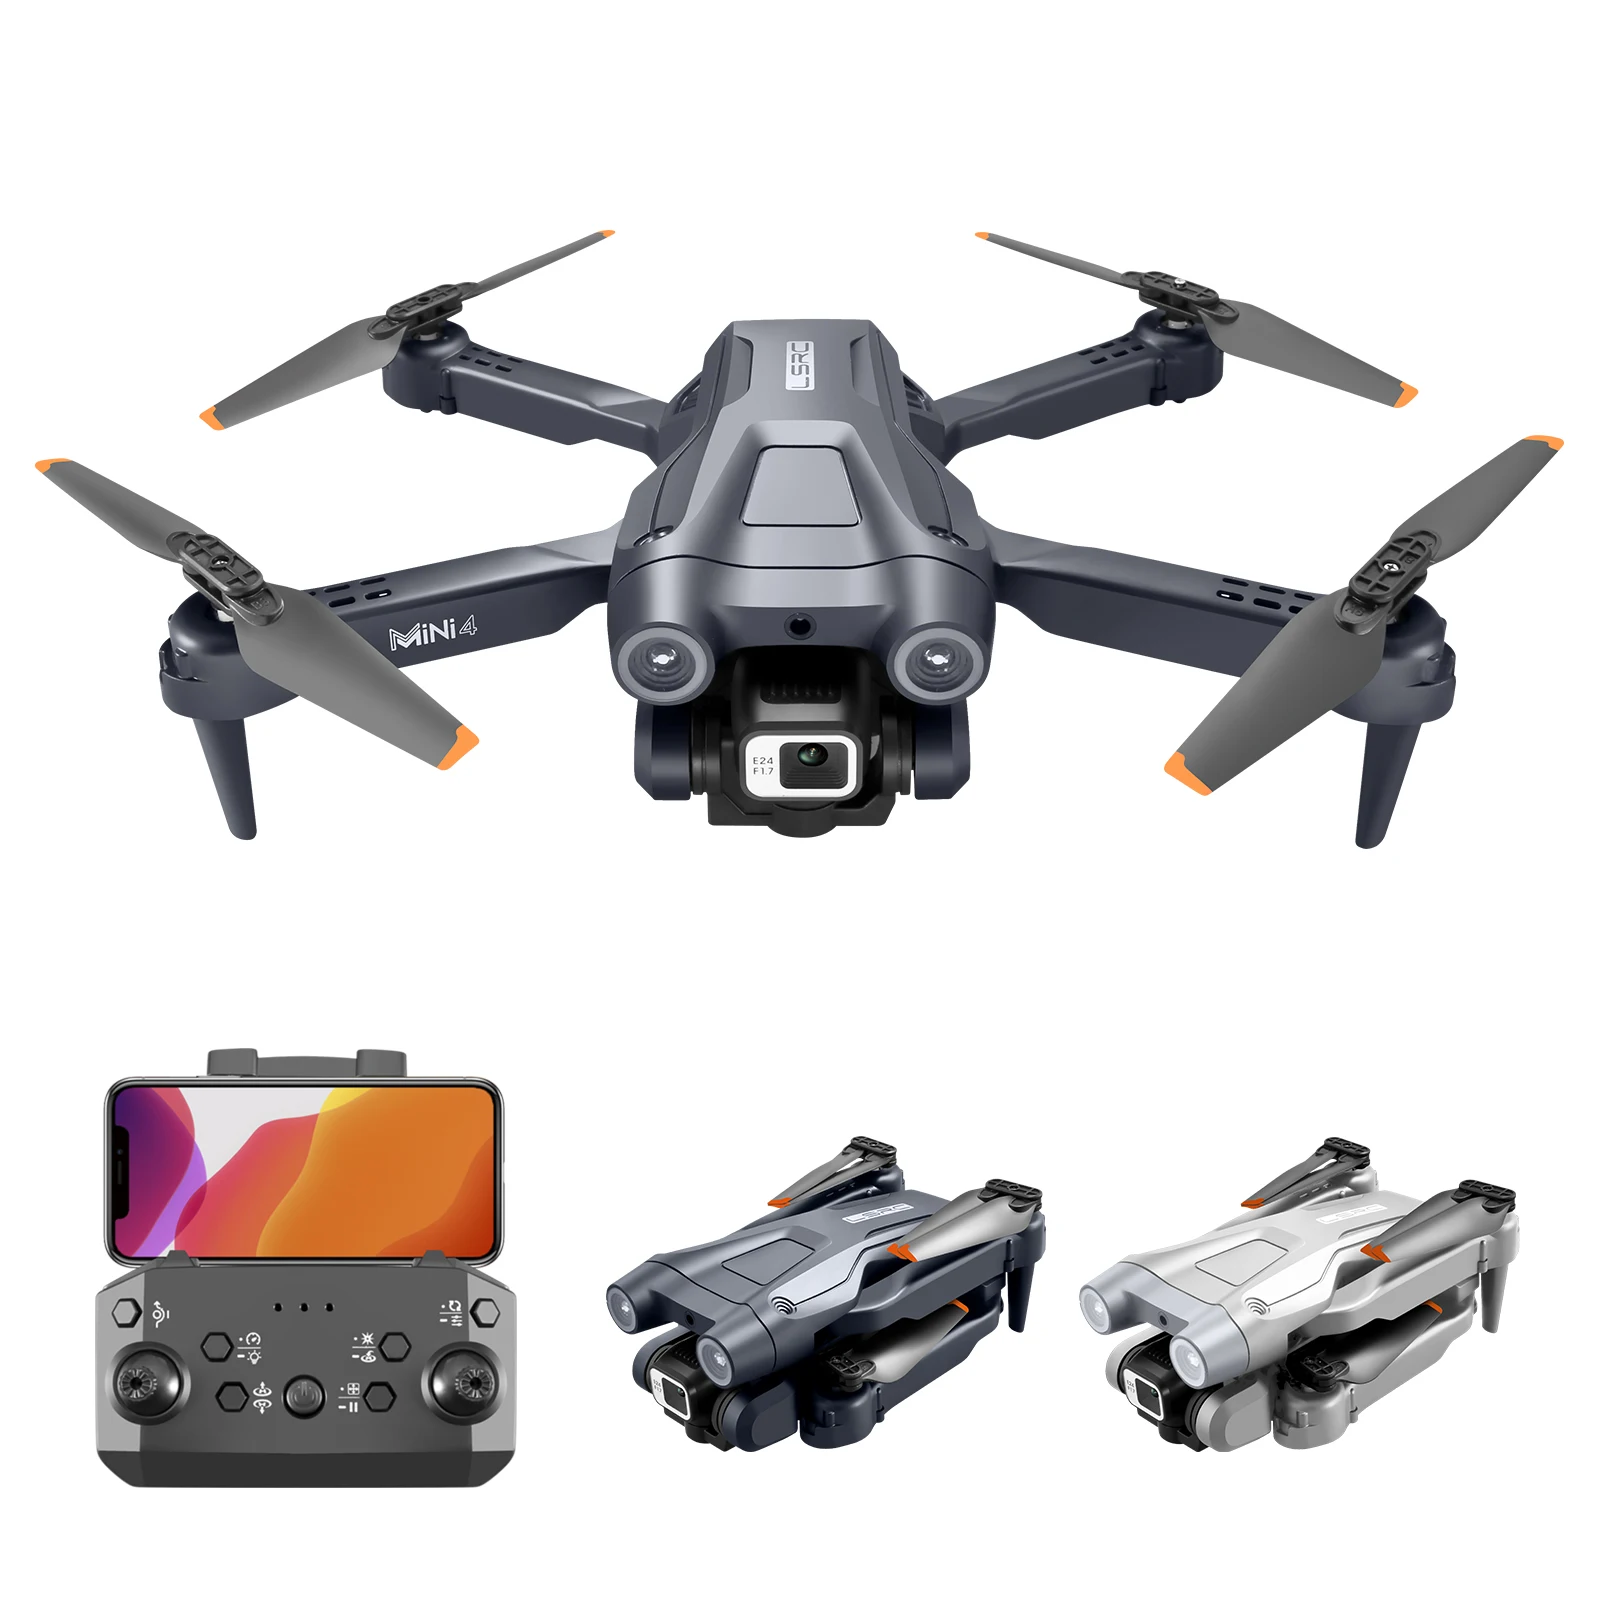 MINI 4 Drone Aerial UAV 4K Invert Aerial Vehicle Optical Flow Location Obstacle Avoidance Remote Control Aircraft Toy